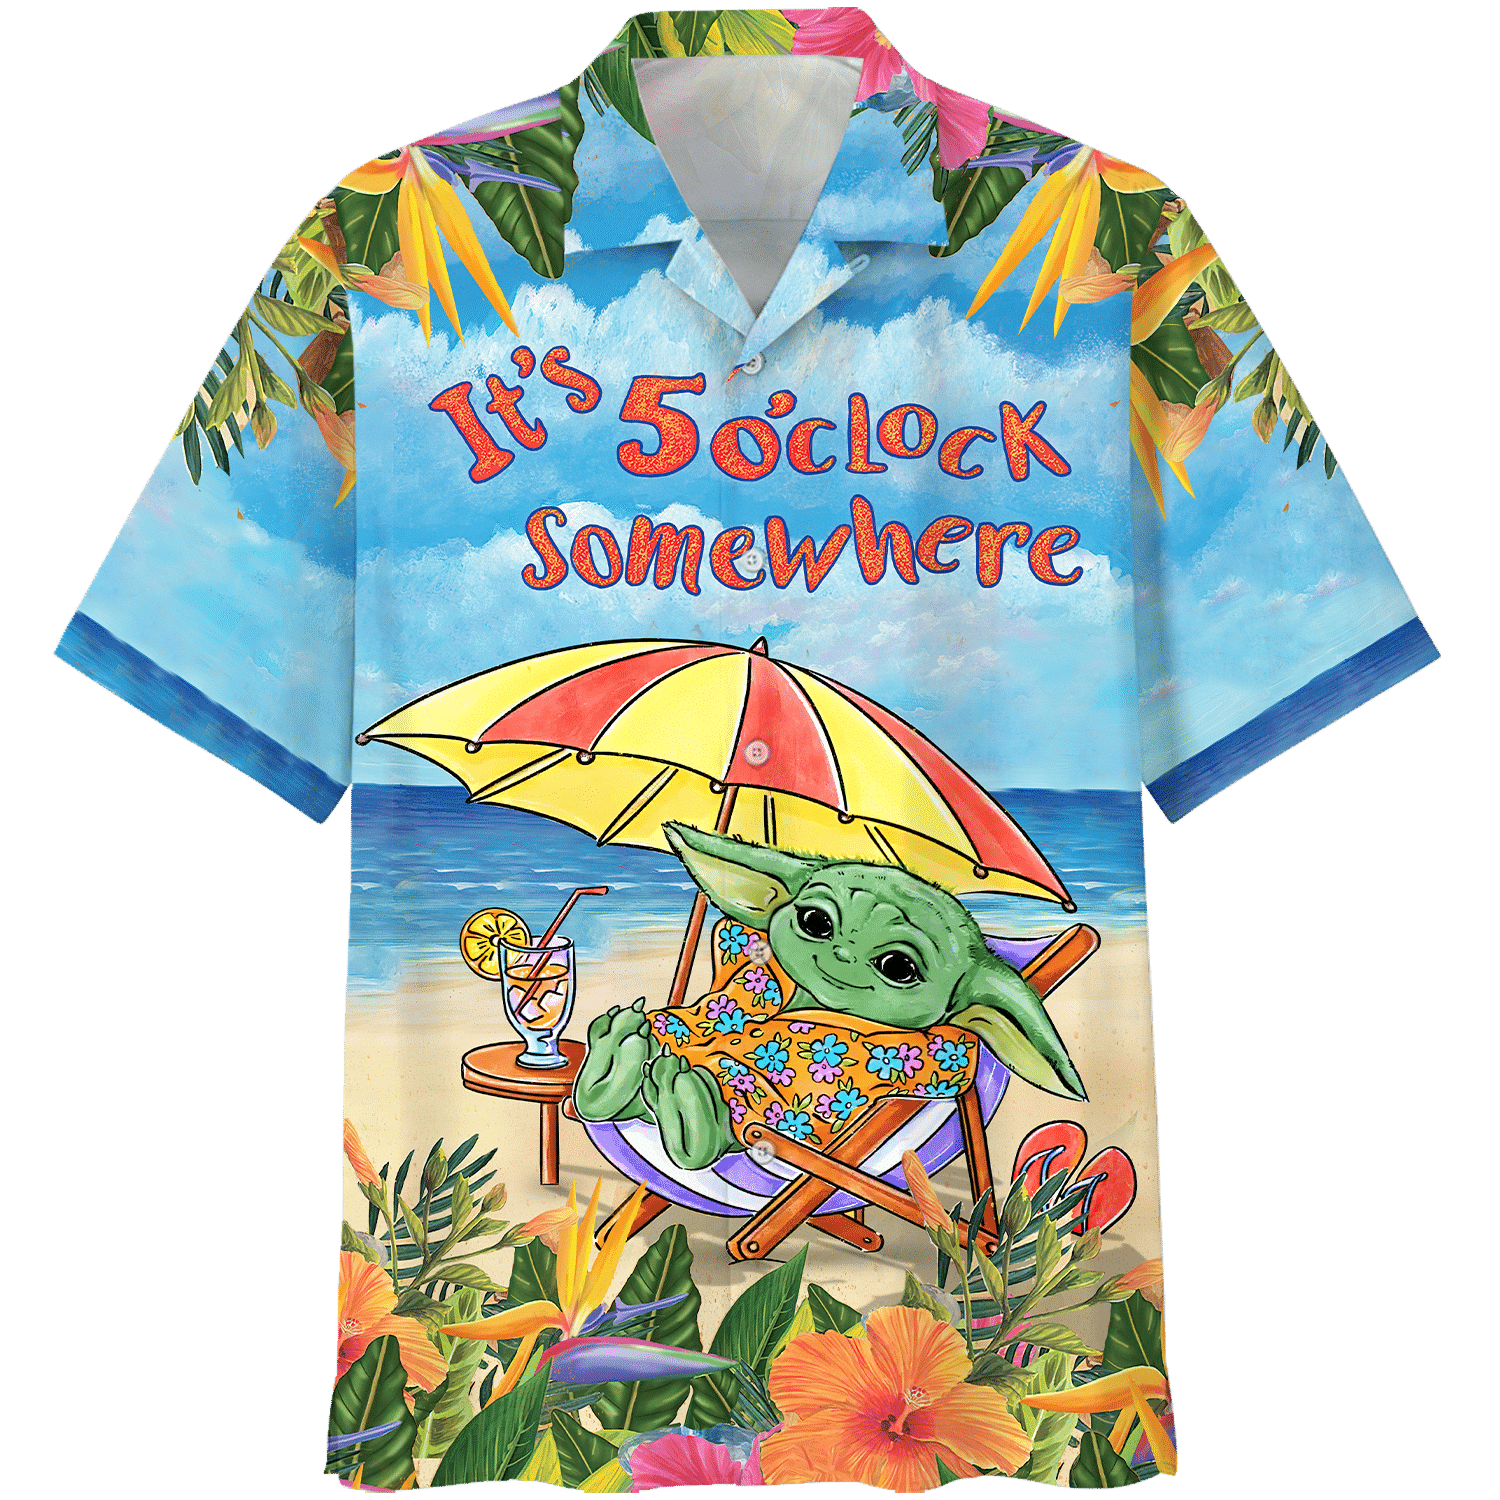 Choose from the many styles and colors to find your favorite Hawaiian Shirt below 87